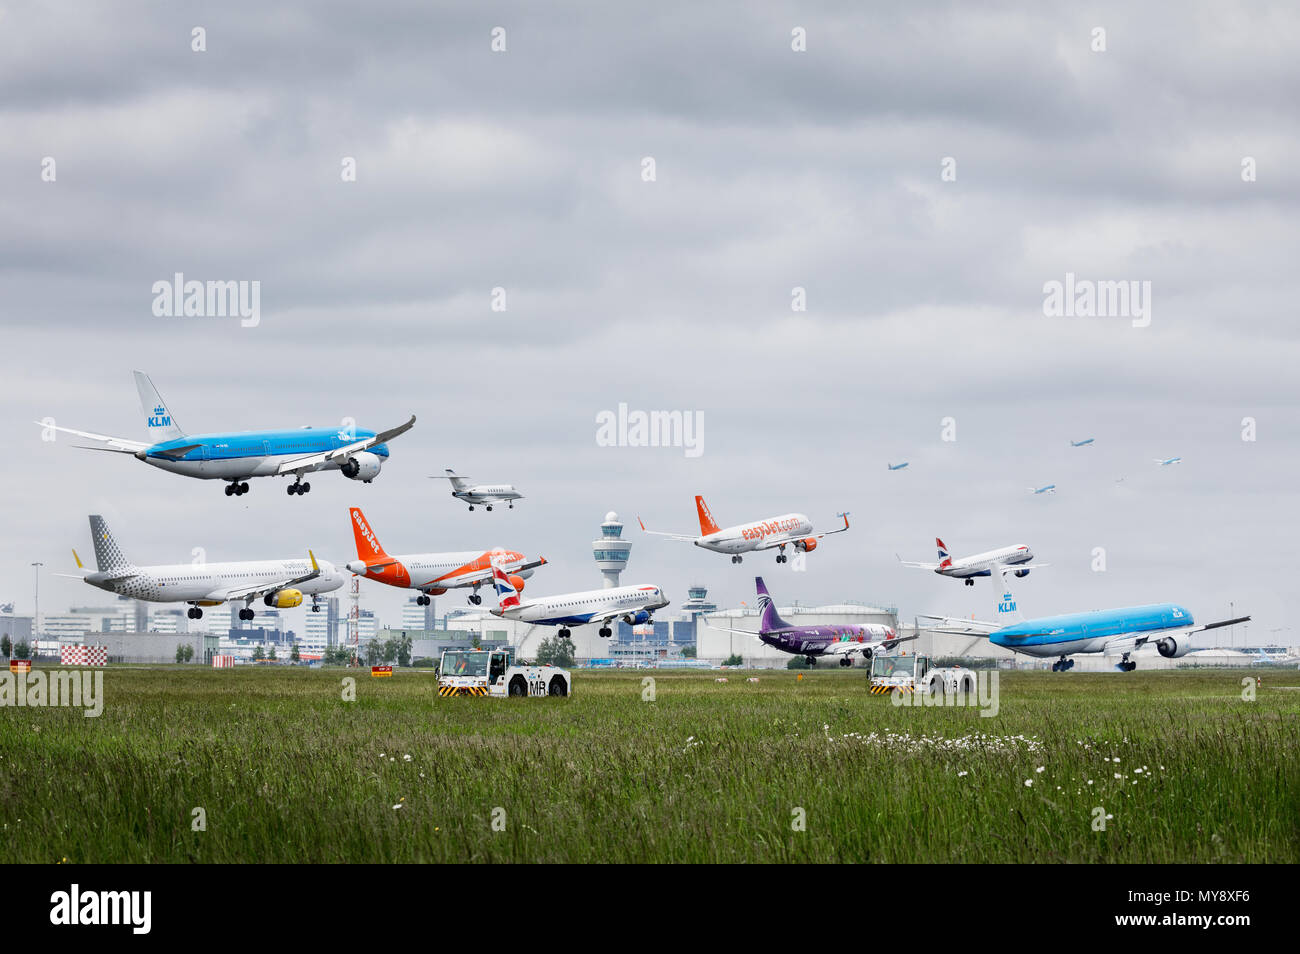 Stacked photo of multiple planes arriving, landing at Amsterdam Schiphol Airport. Stock Photo